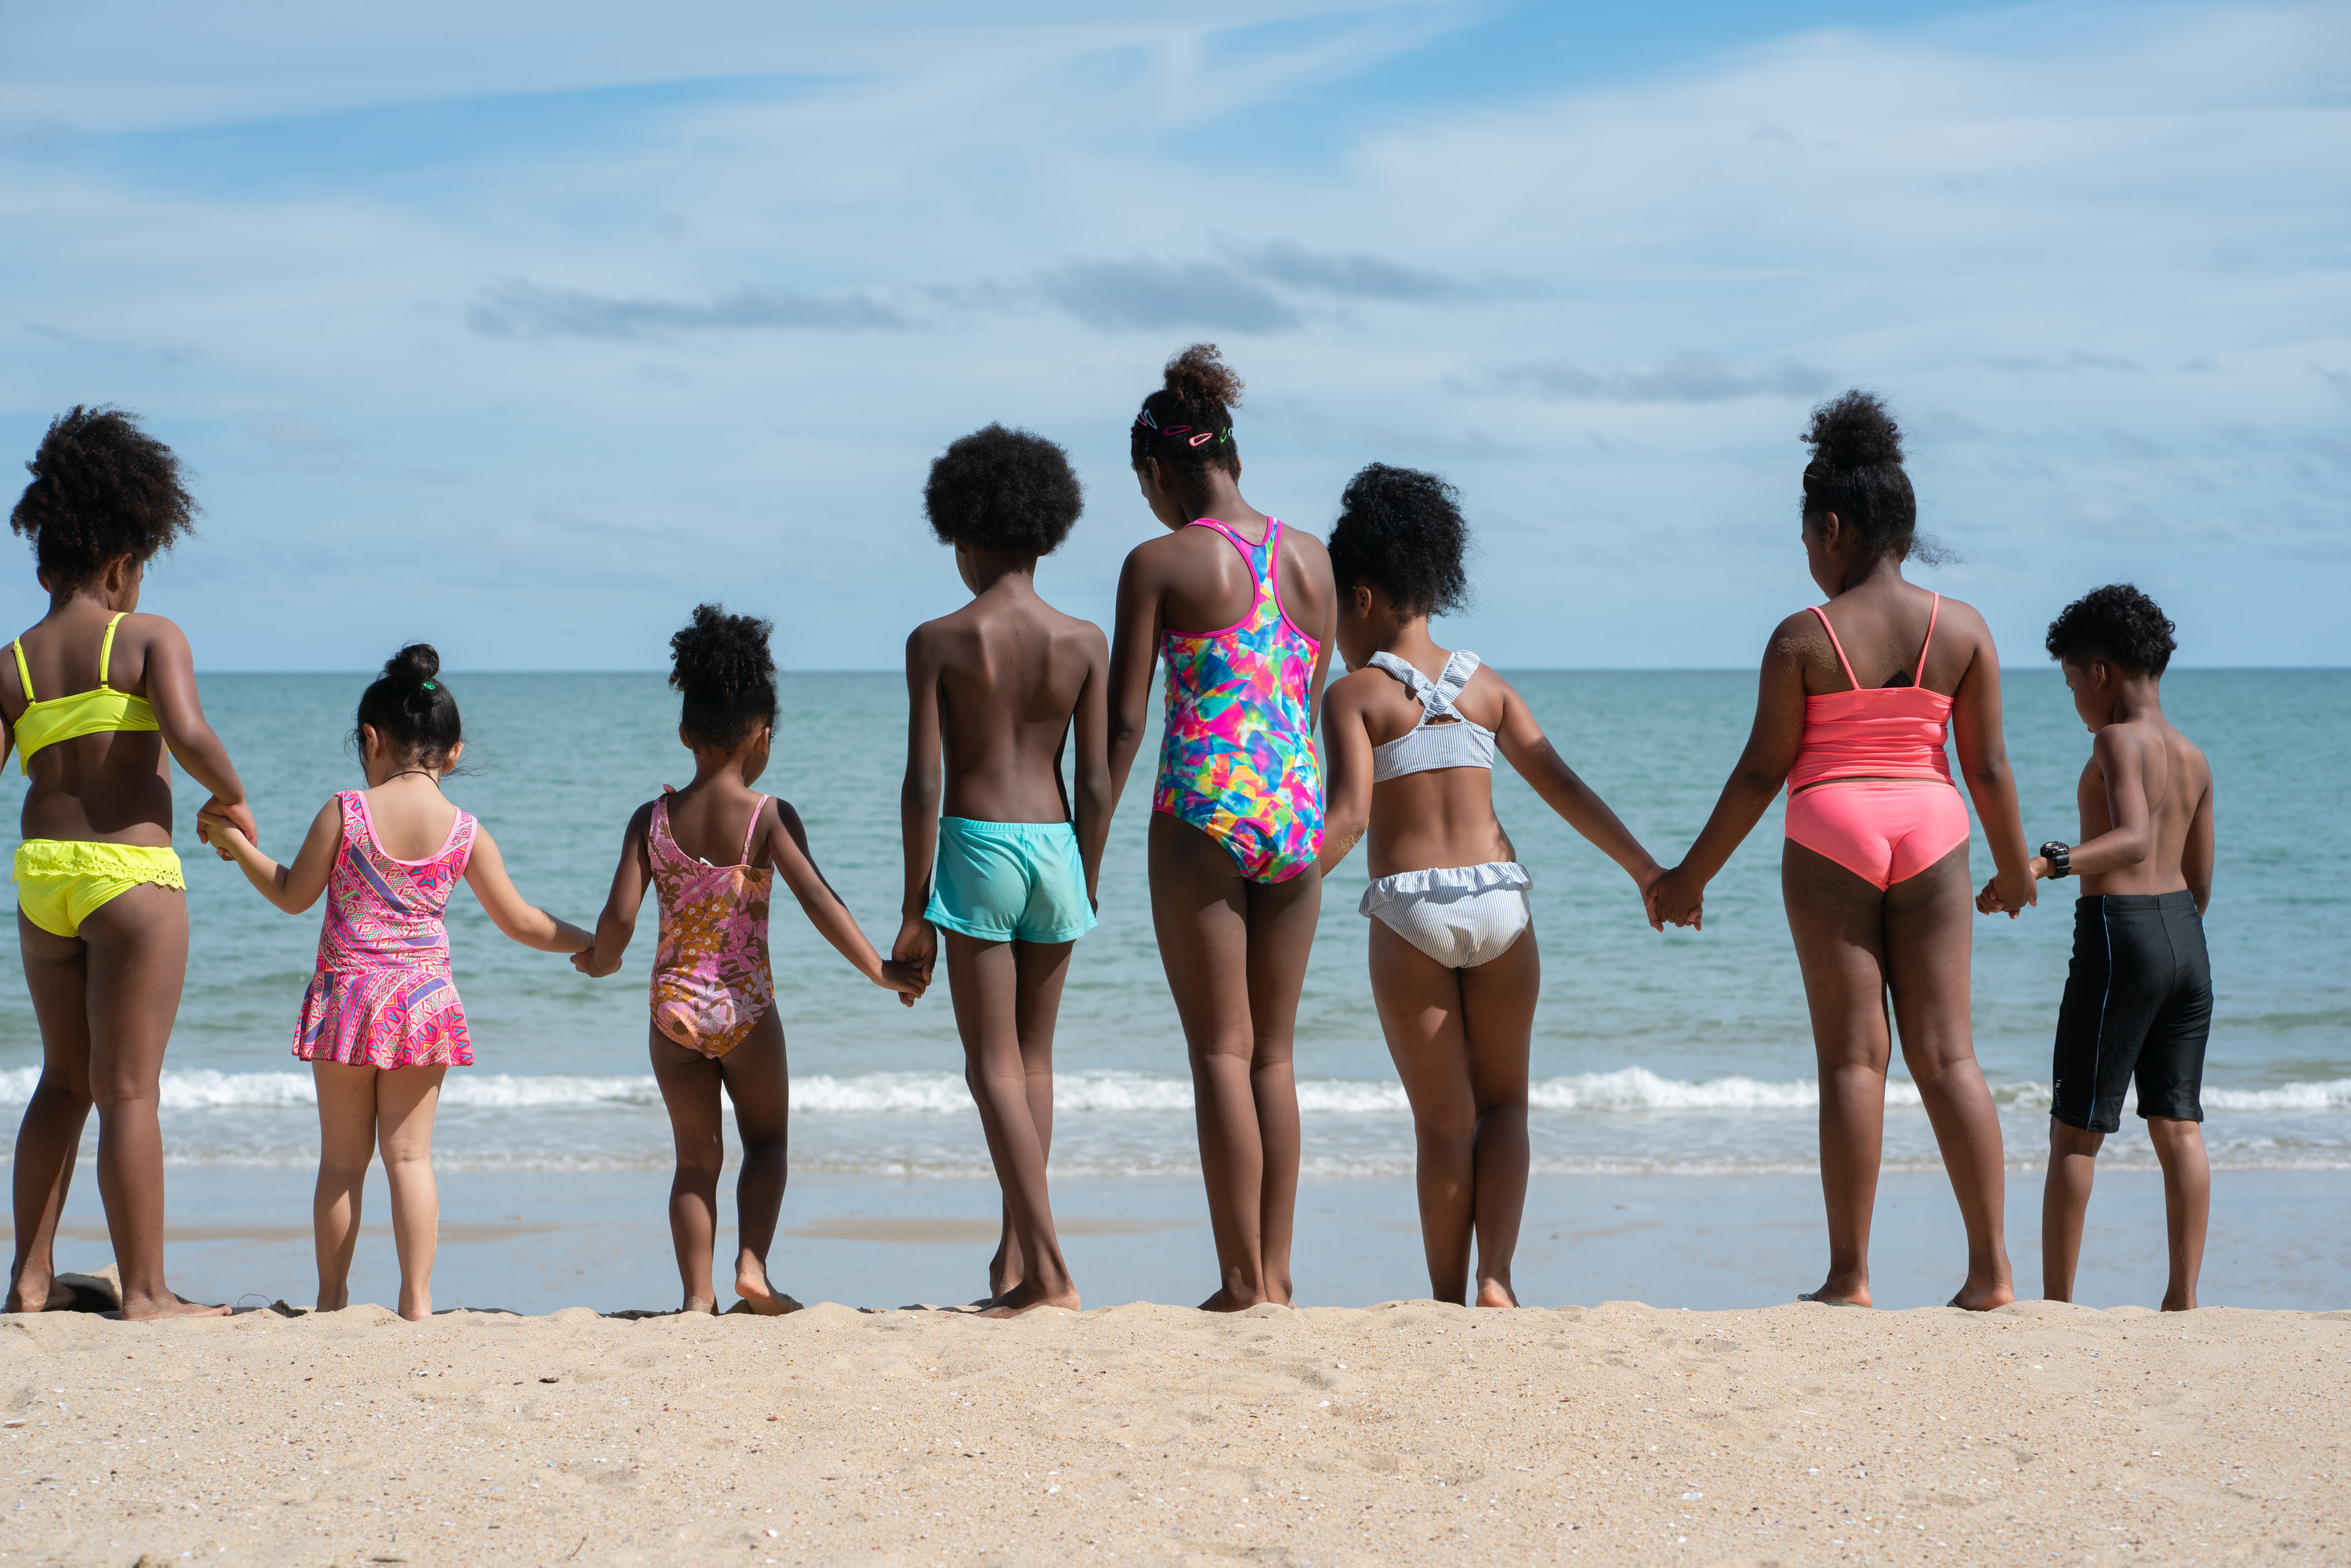 Black children hold hands, wearing swimsuits and standing in a row on the shore of a beach, facing the ocean